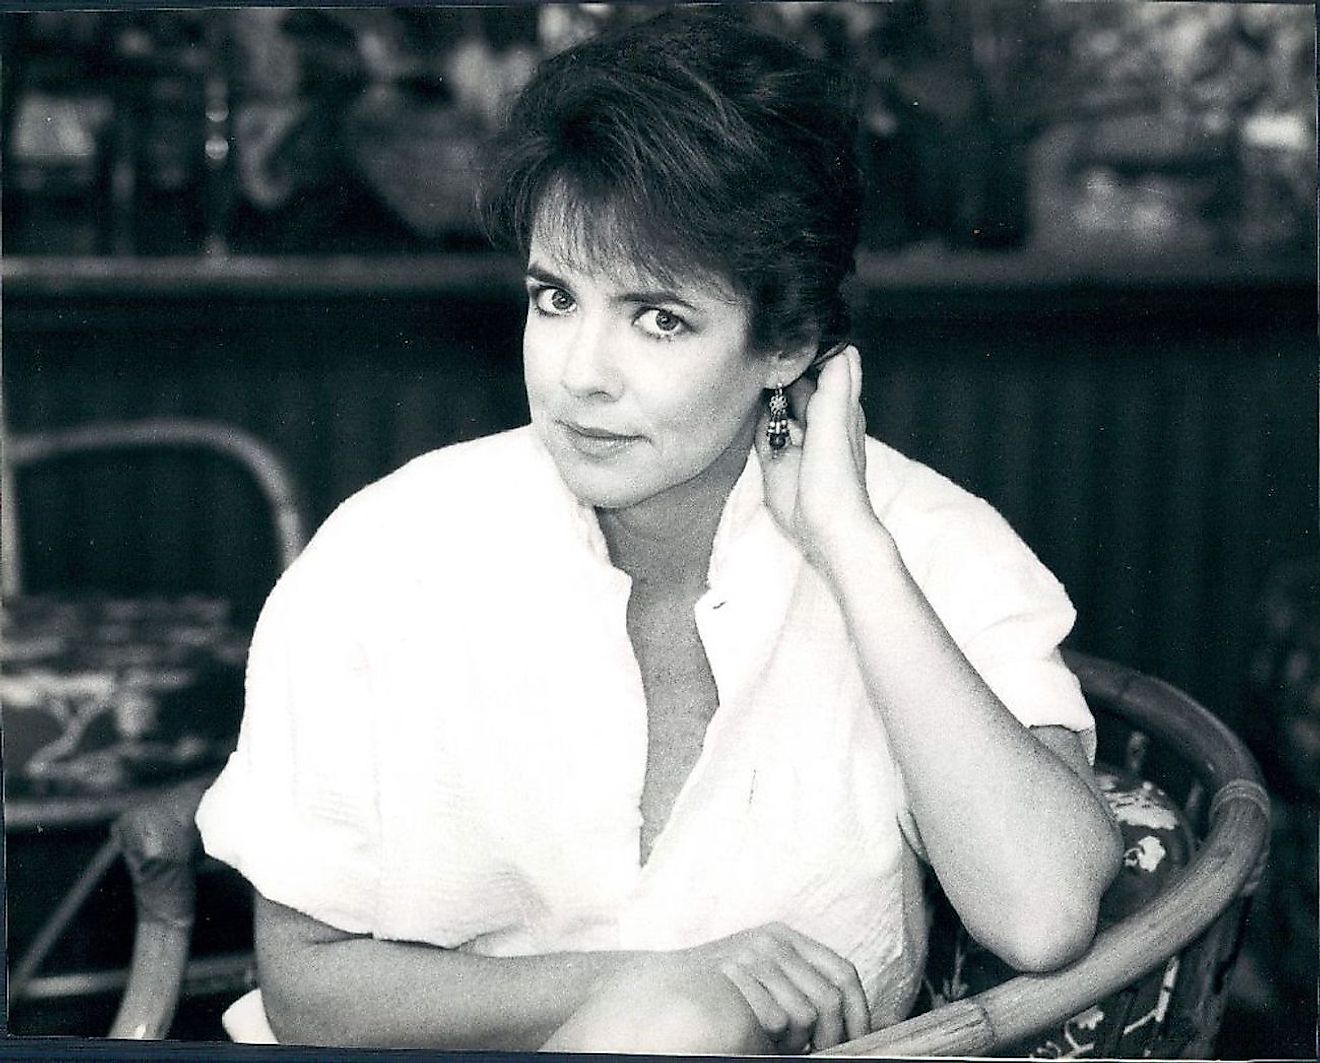 Stockard Channing in 1984. Image credit: Unknown author/Public domain